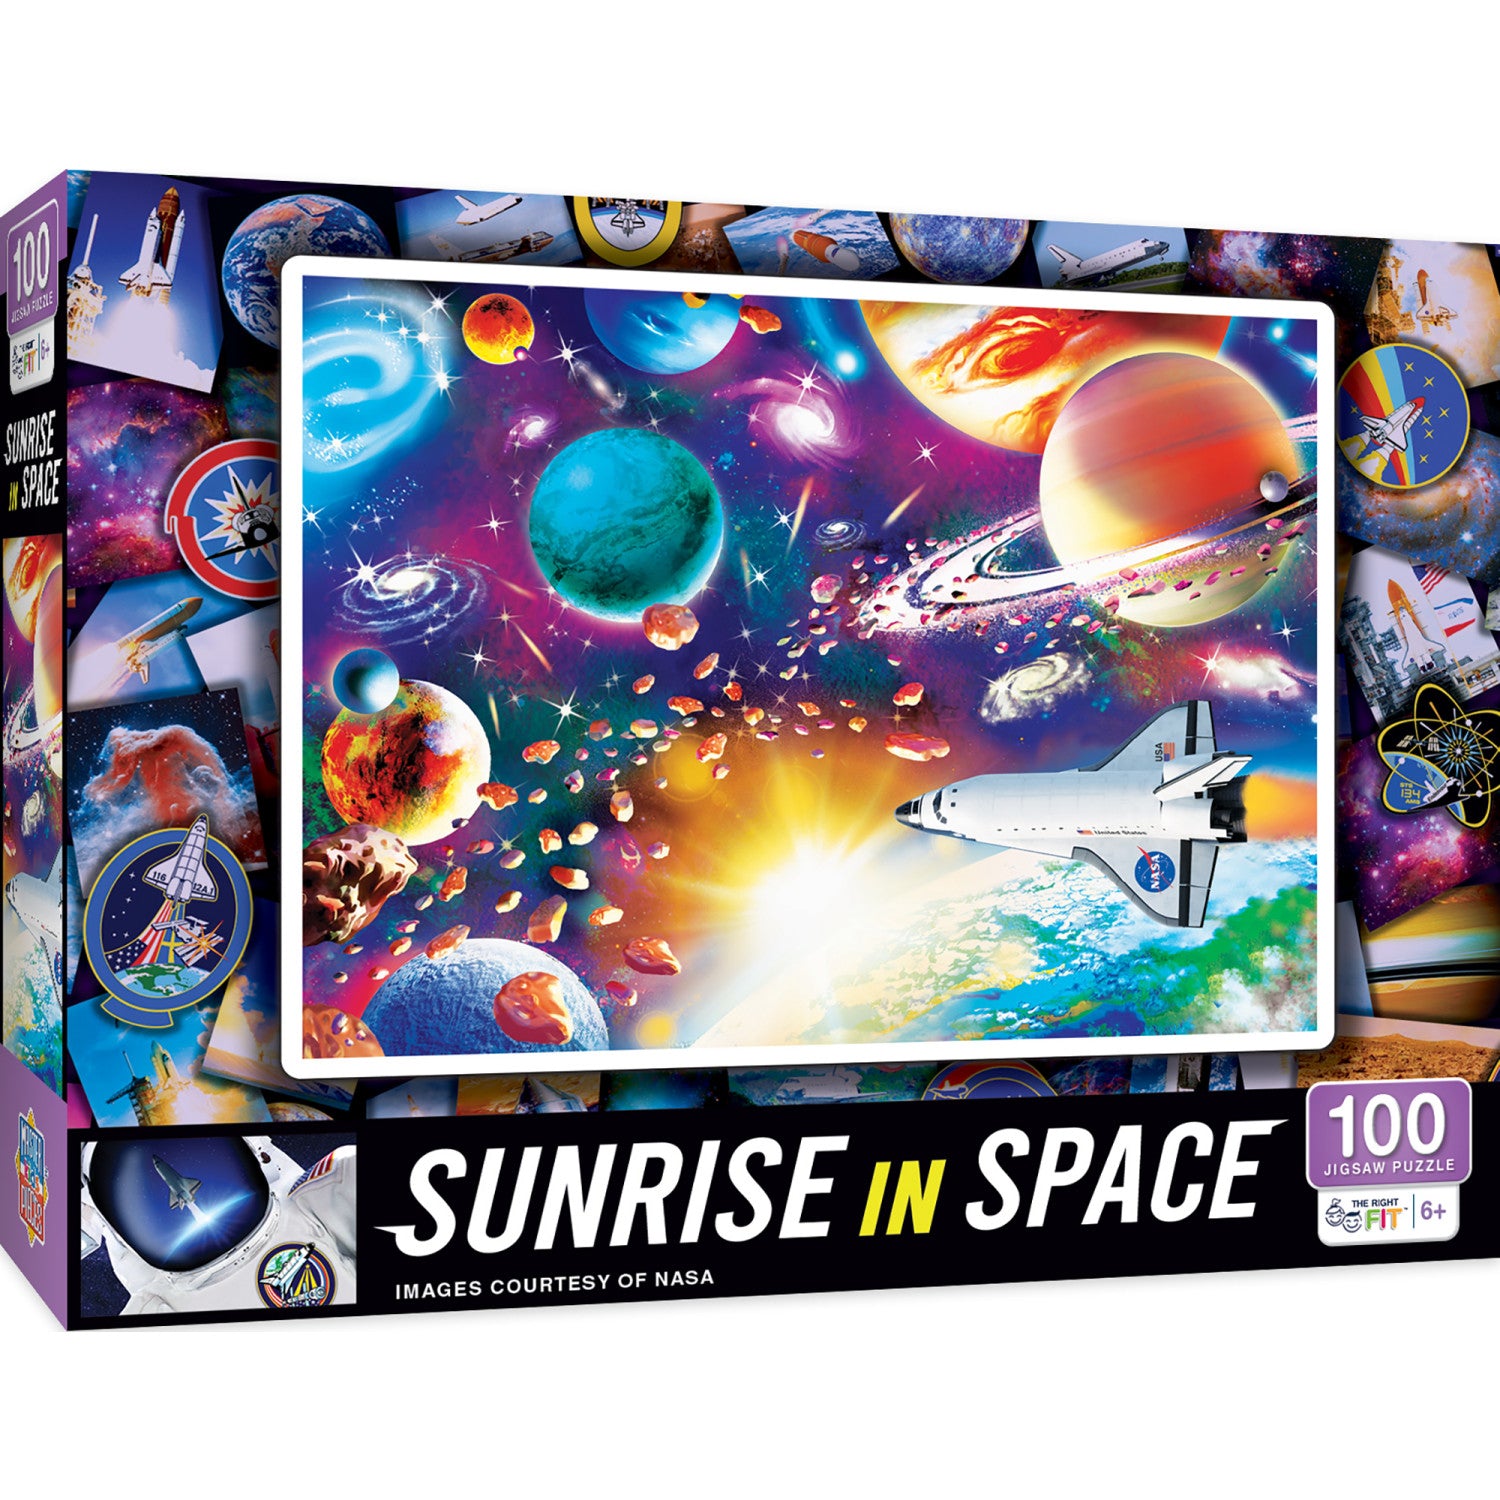 NASA - Sunrise in Space 100 Piece Jigsaw Puzzle